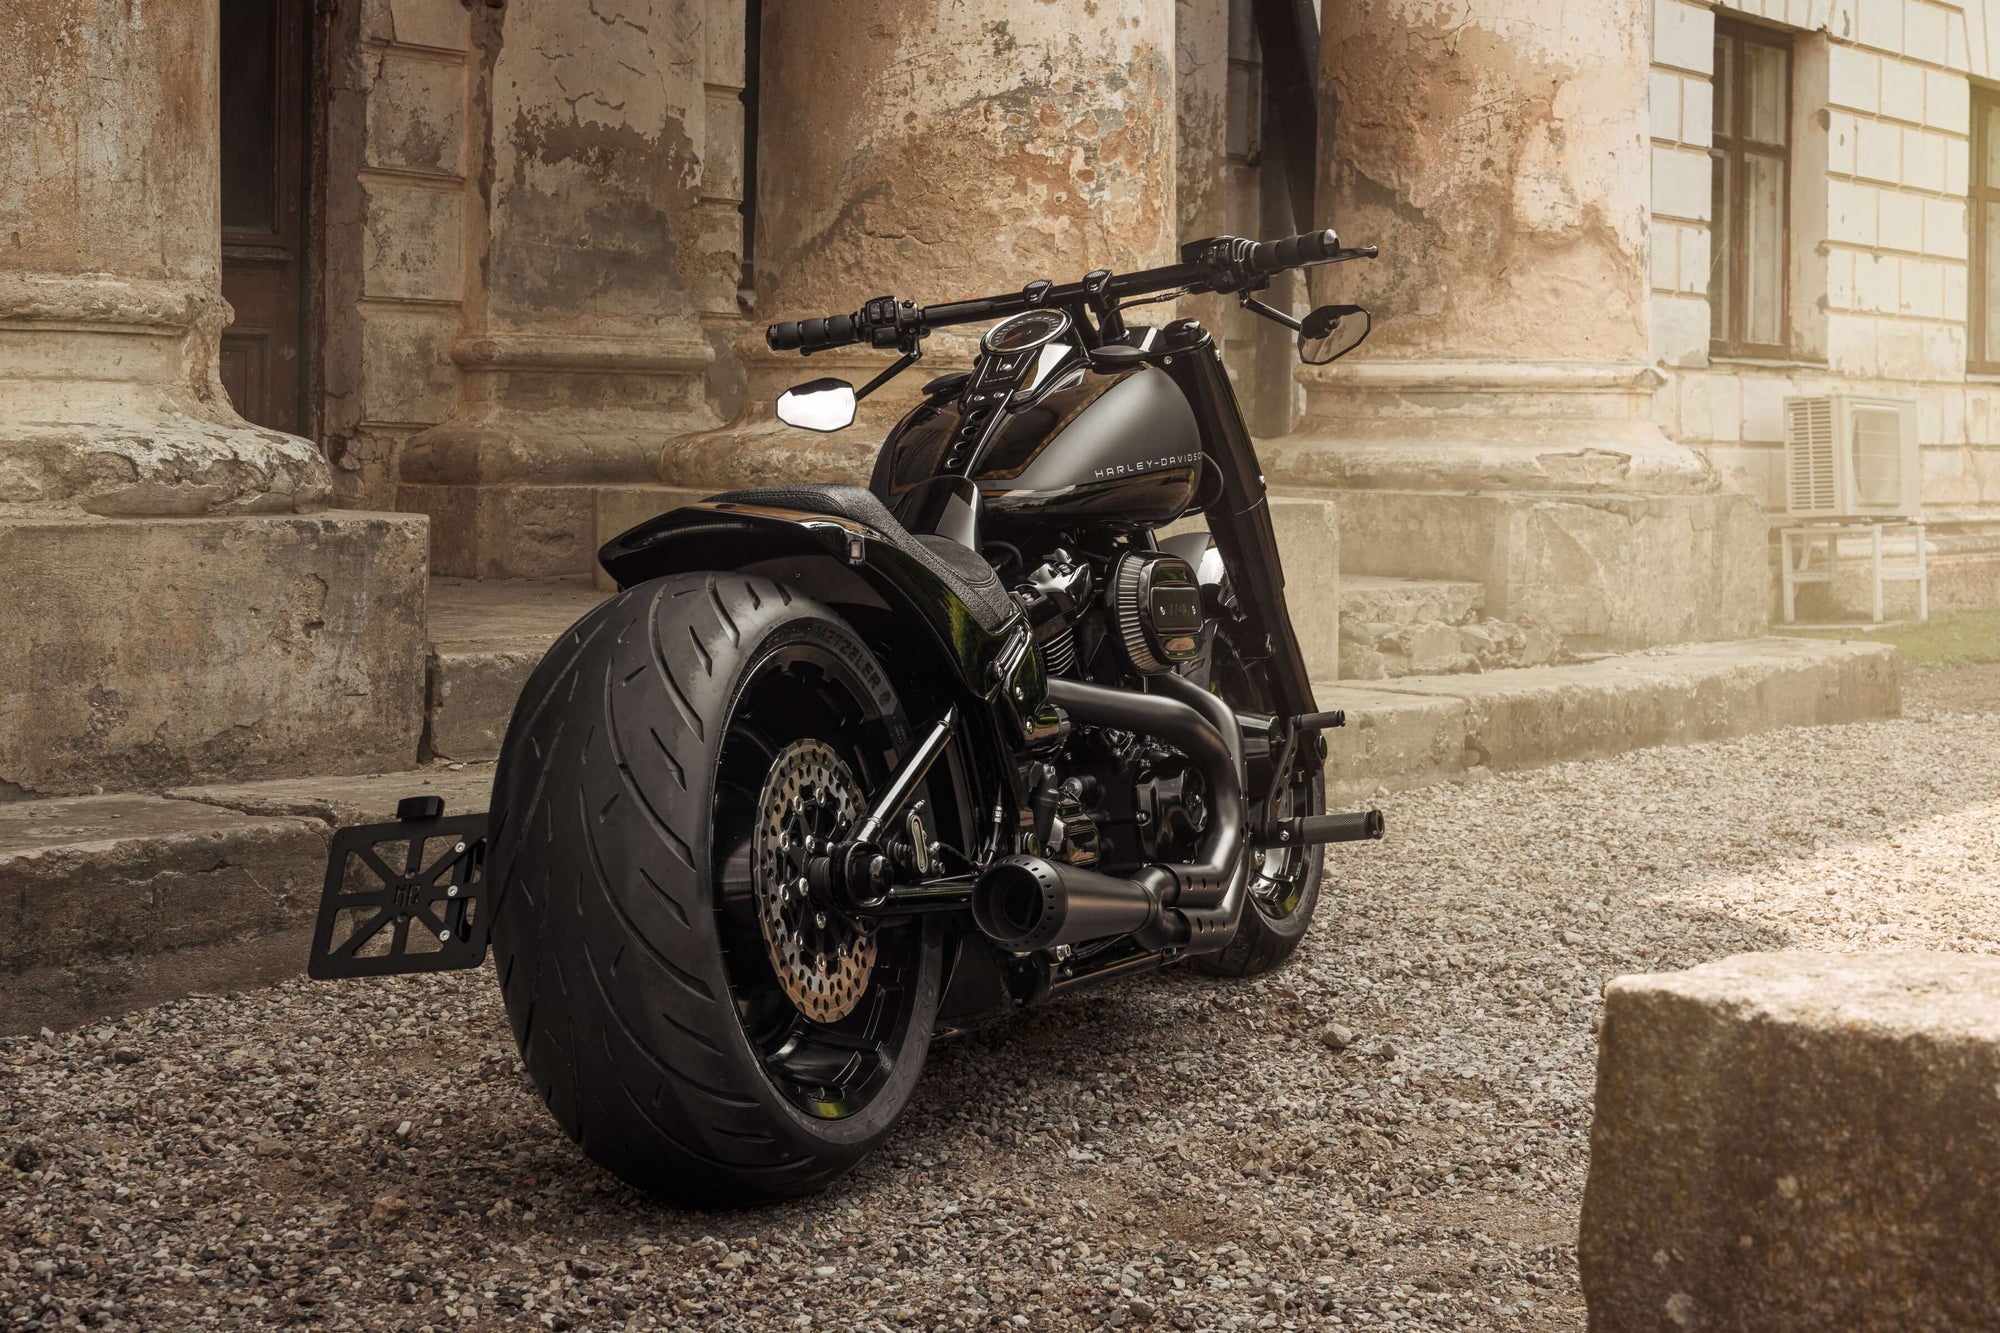 Harley Davidson motorcycle with Killer Custom parts from the rear with an old mansion in the background